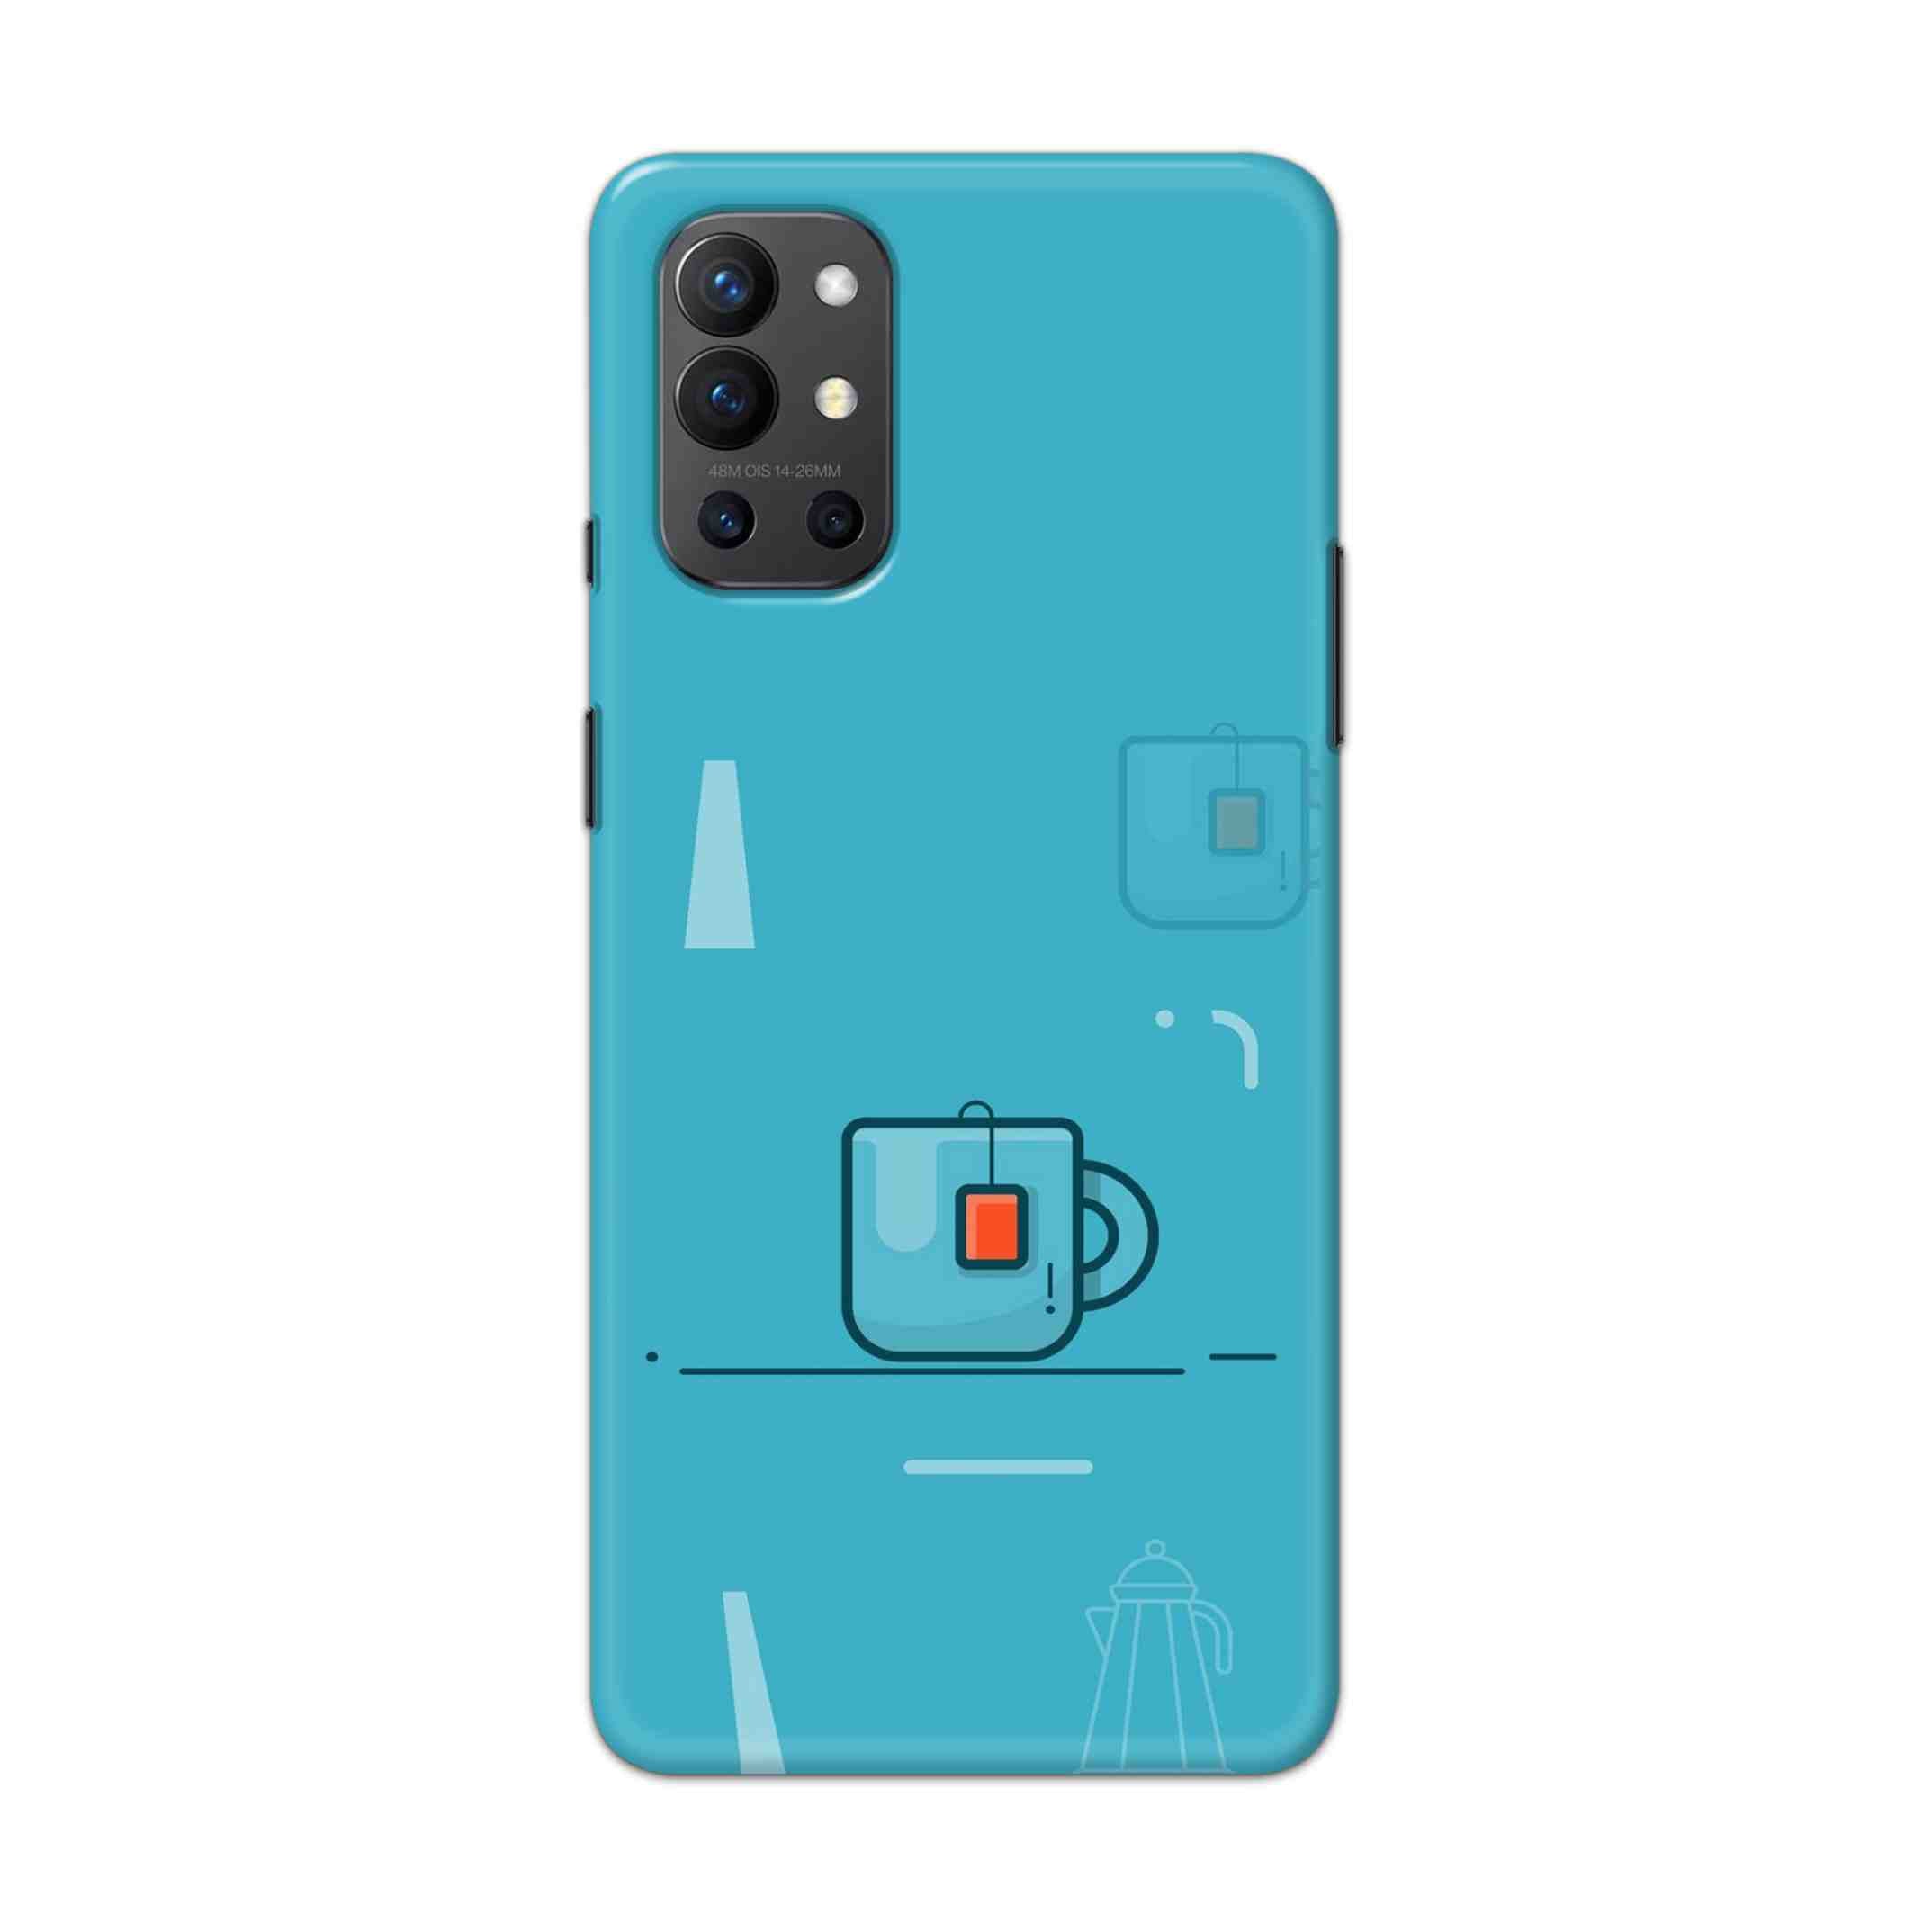 Buy Green Tea Hard Back Mobile Phone Case Cover For OnePlus 9R / 8T Online